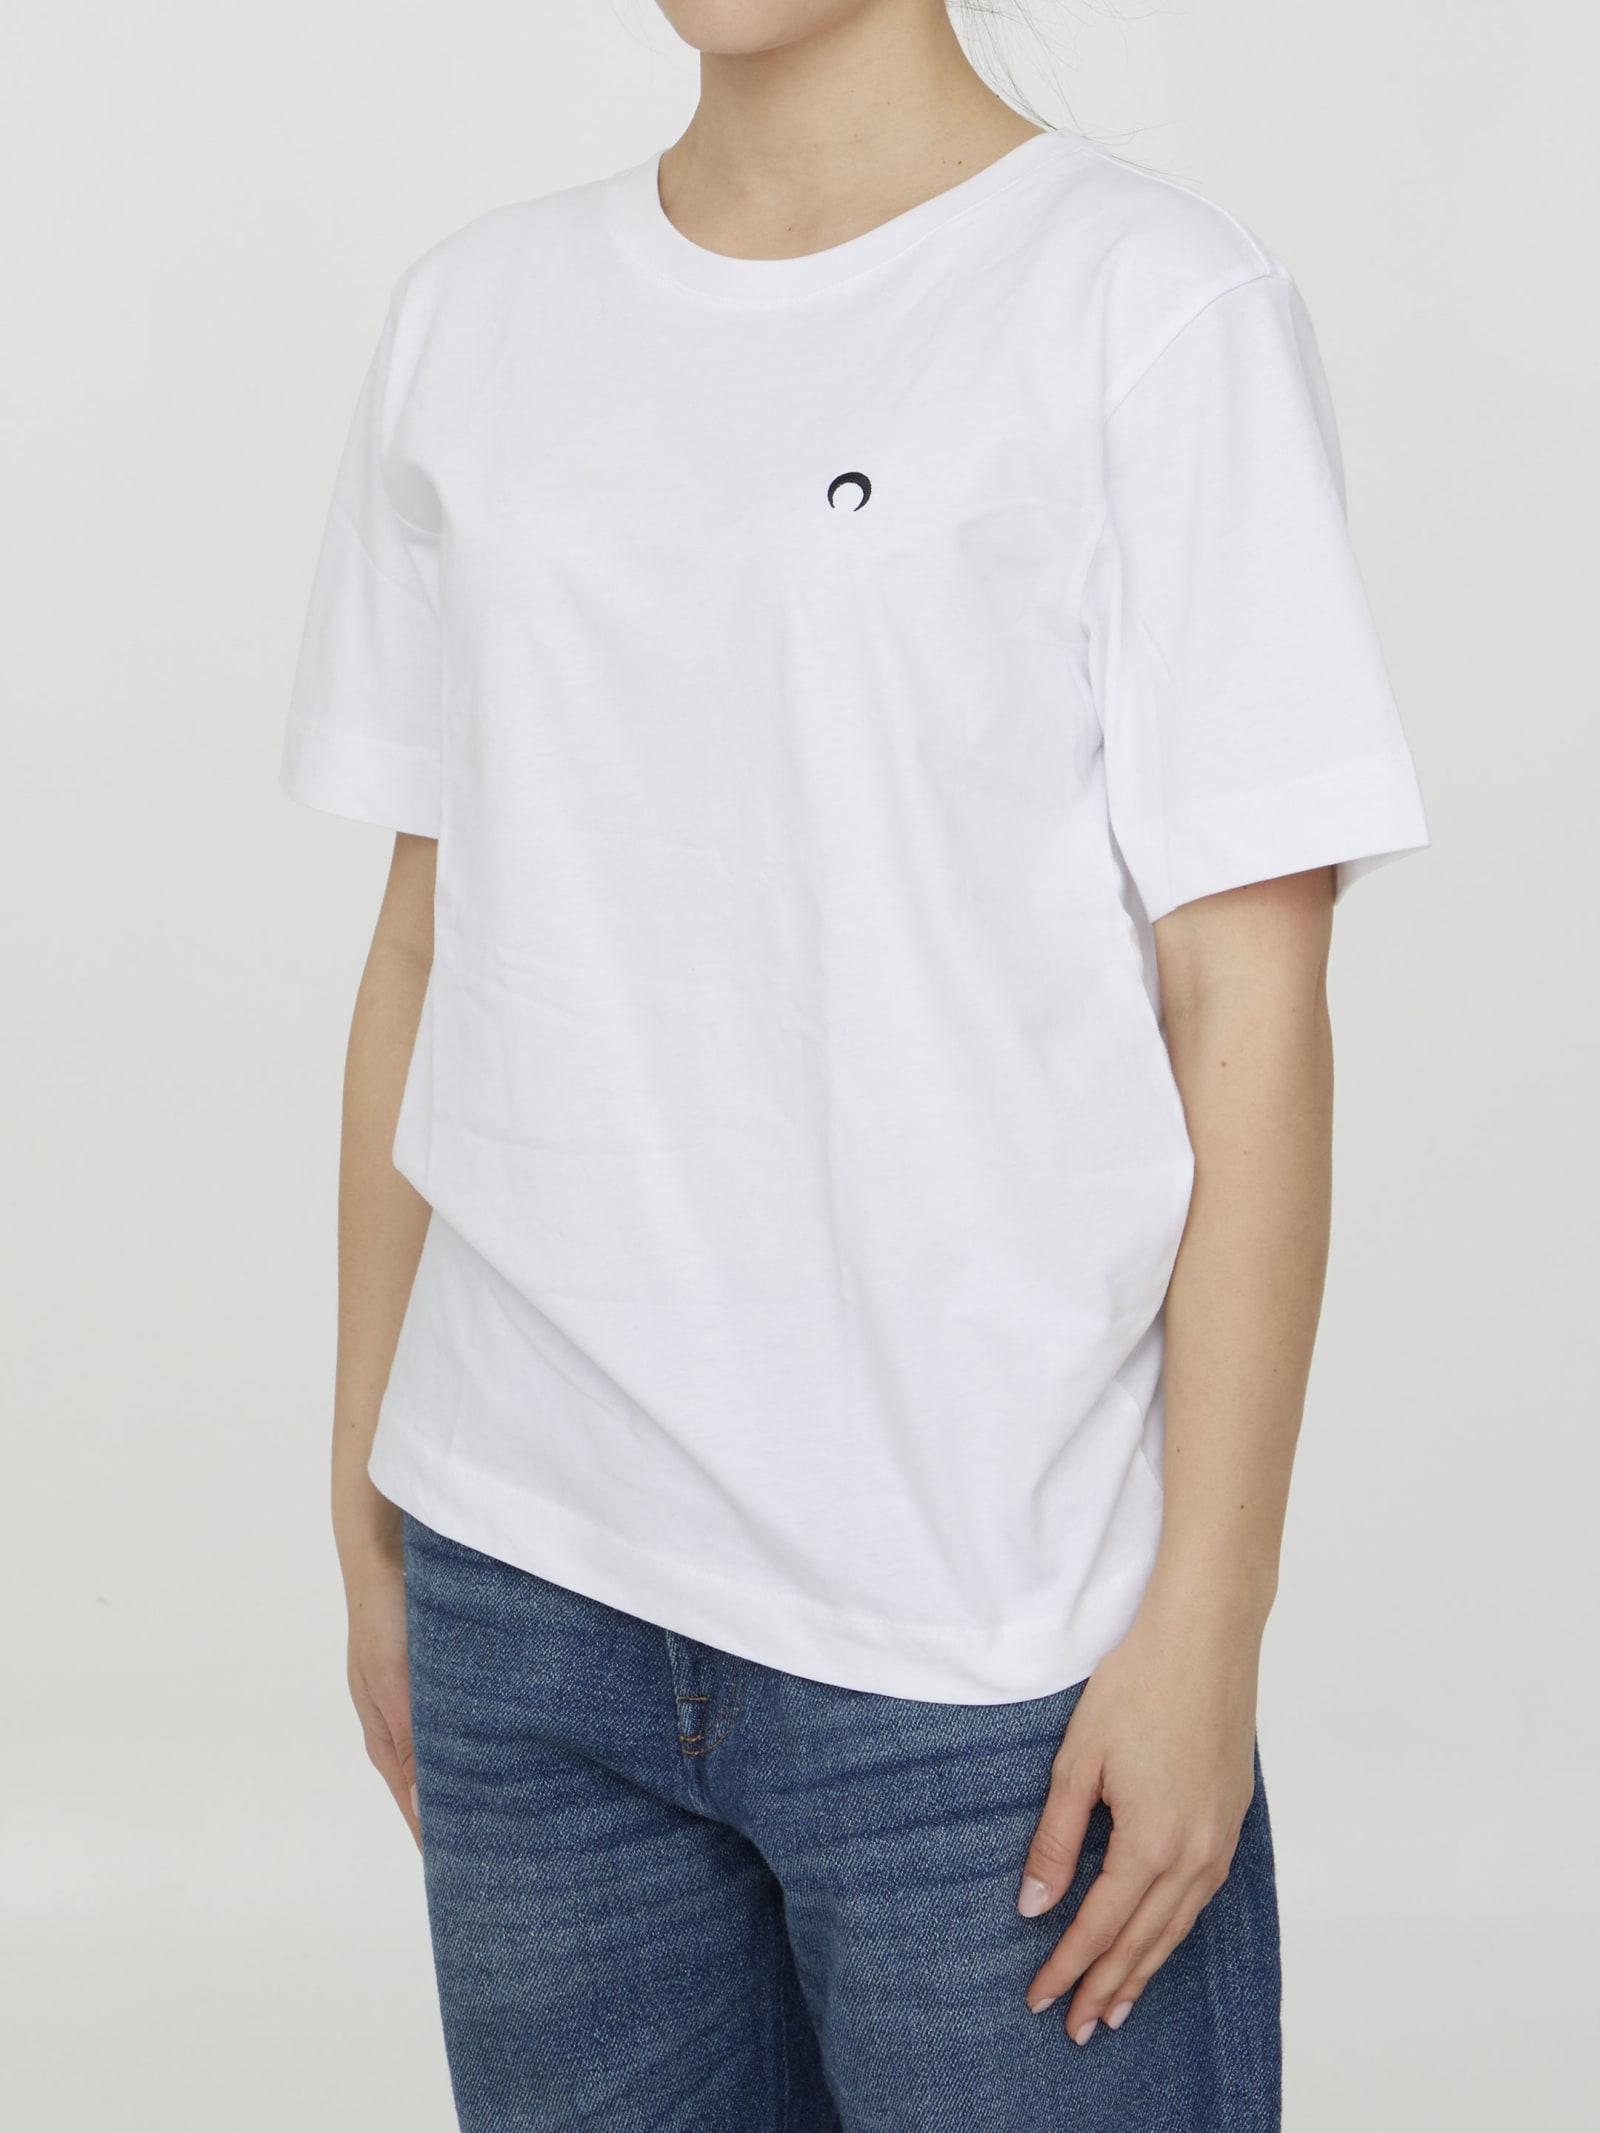 Marine Serre Cotton T-shirt With Logo in White | Lyst